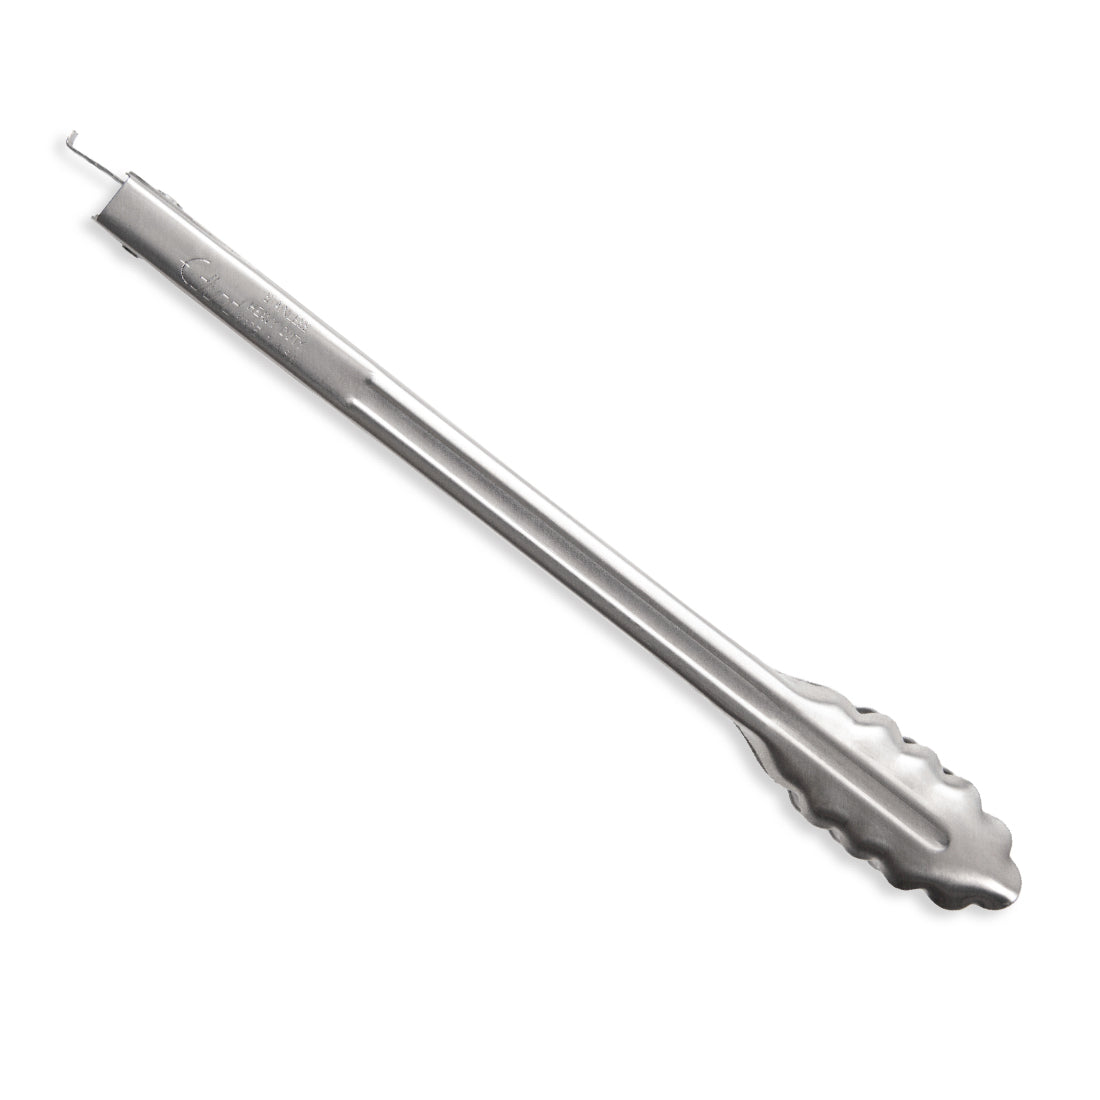 One Simply Terrific Thing: OXO's Stainless Steel Tongs